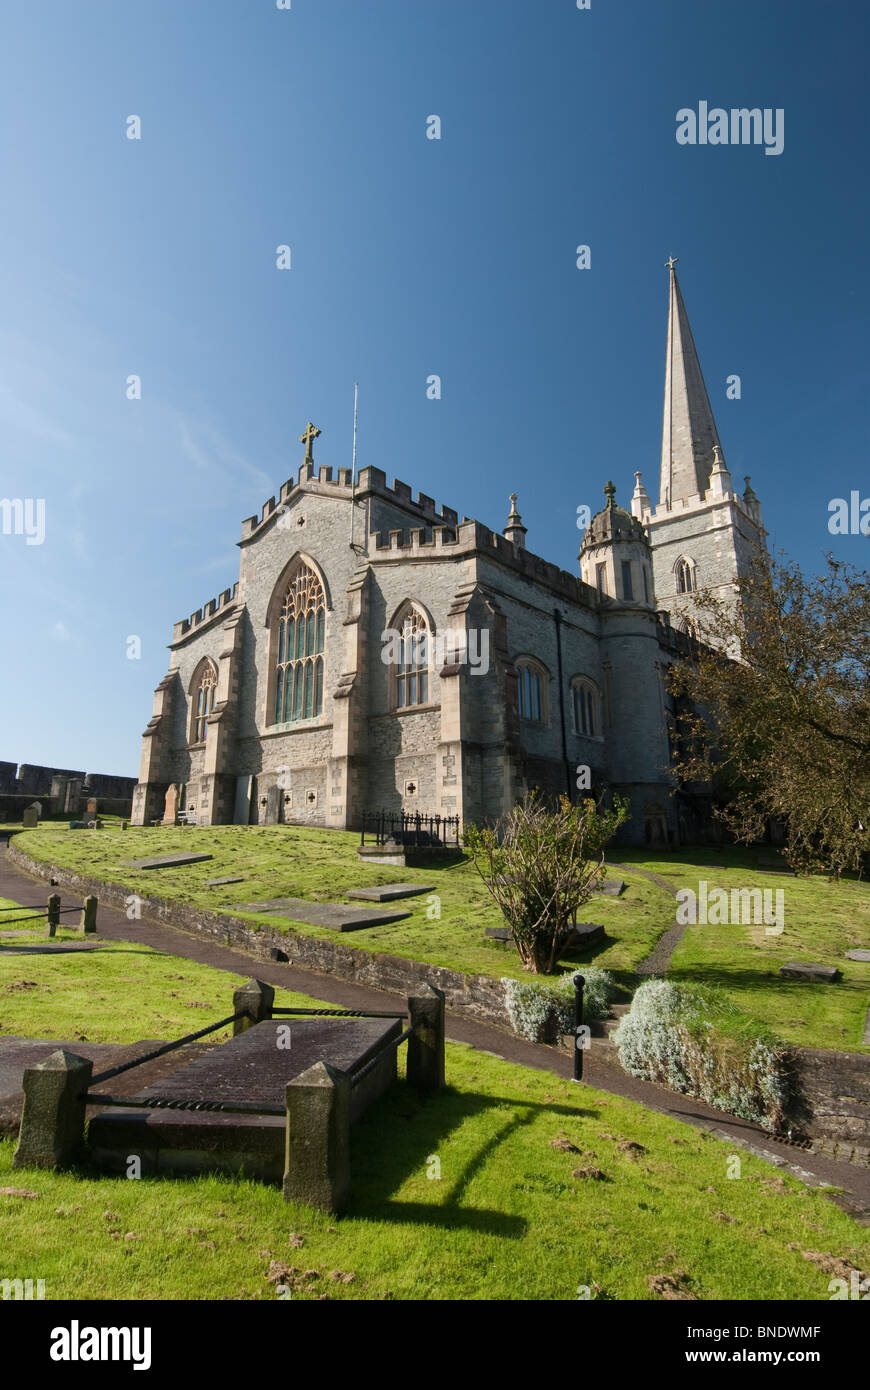 St Columb's Cathedral is the City of Londonderry's oldest building, having been completed in 1633. Stock Photo